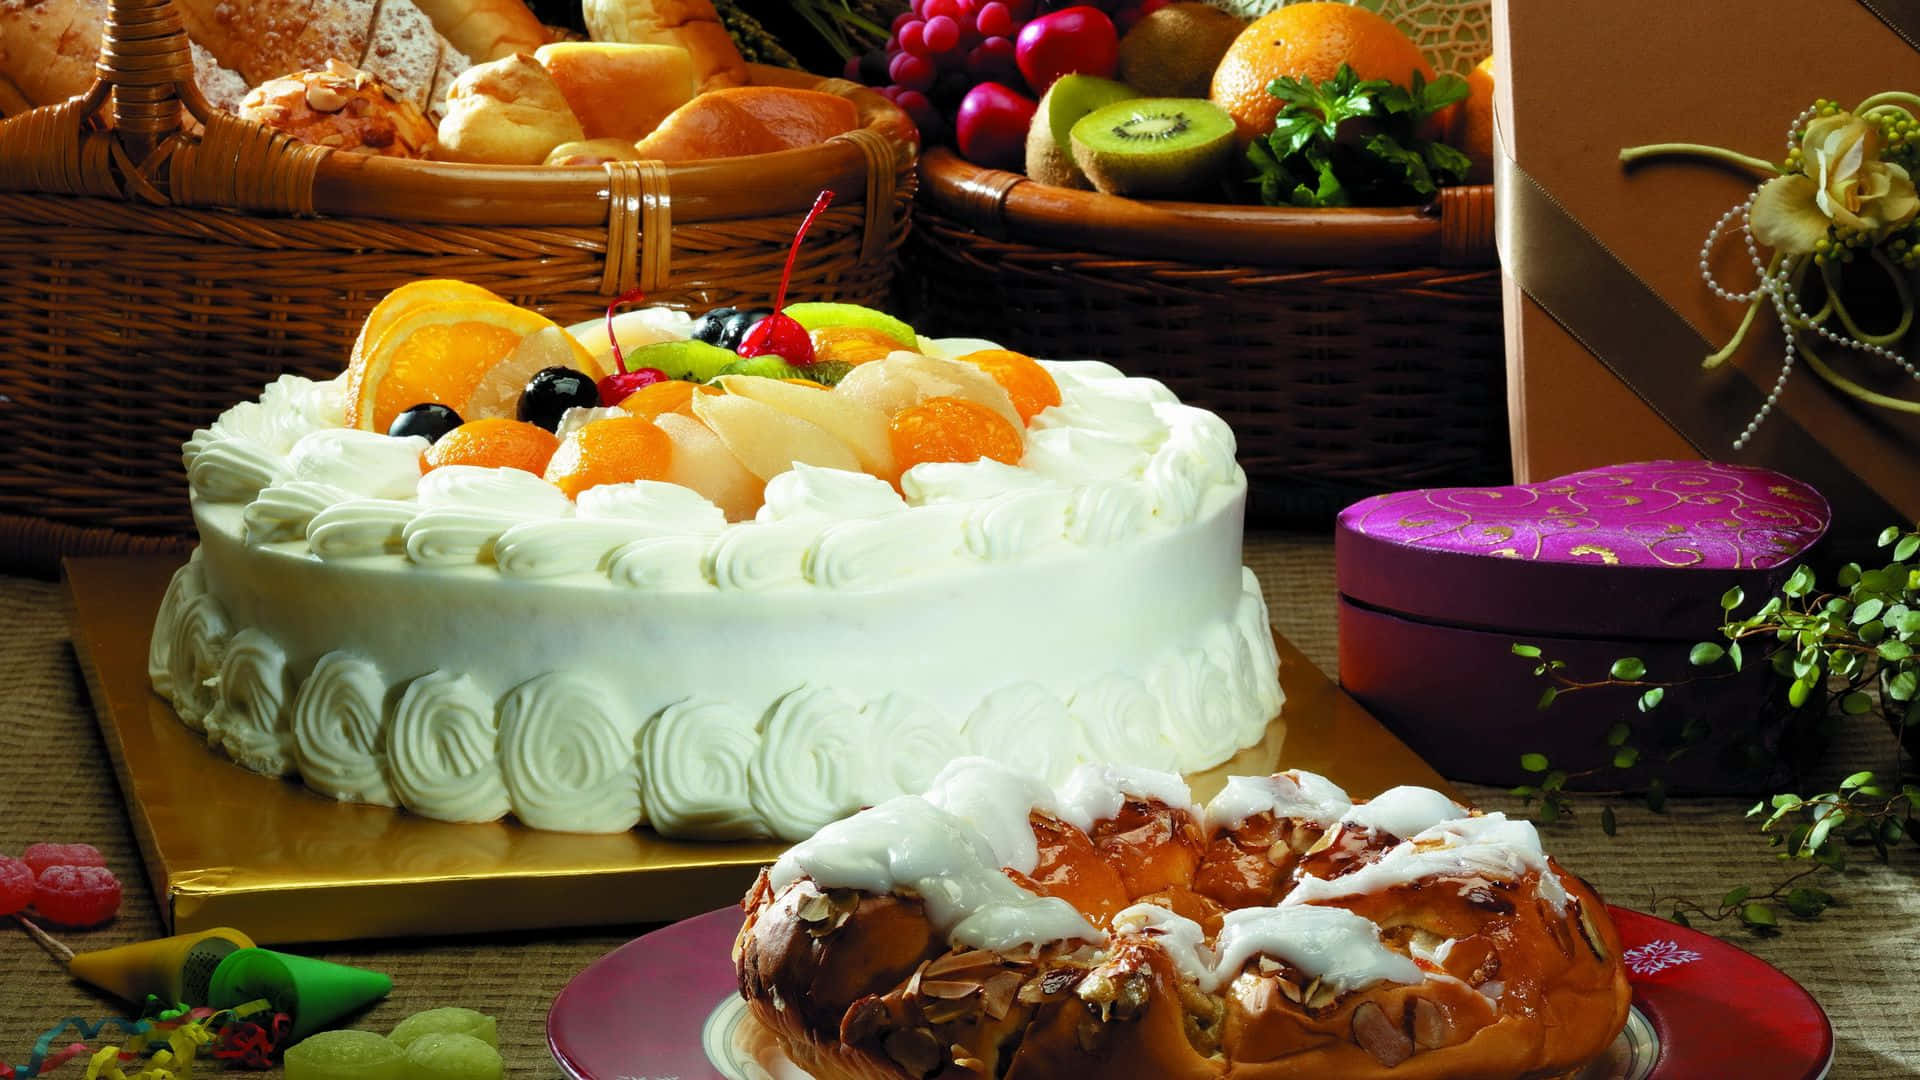 1920x1080 Desserts Background Cake On The Table Background